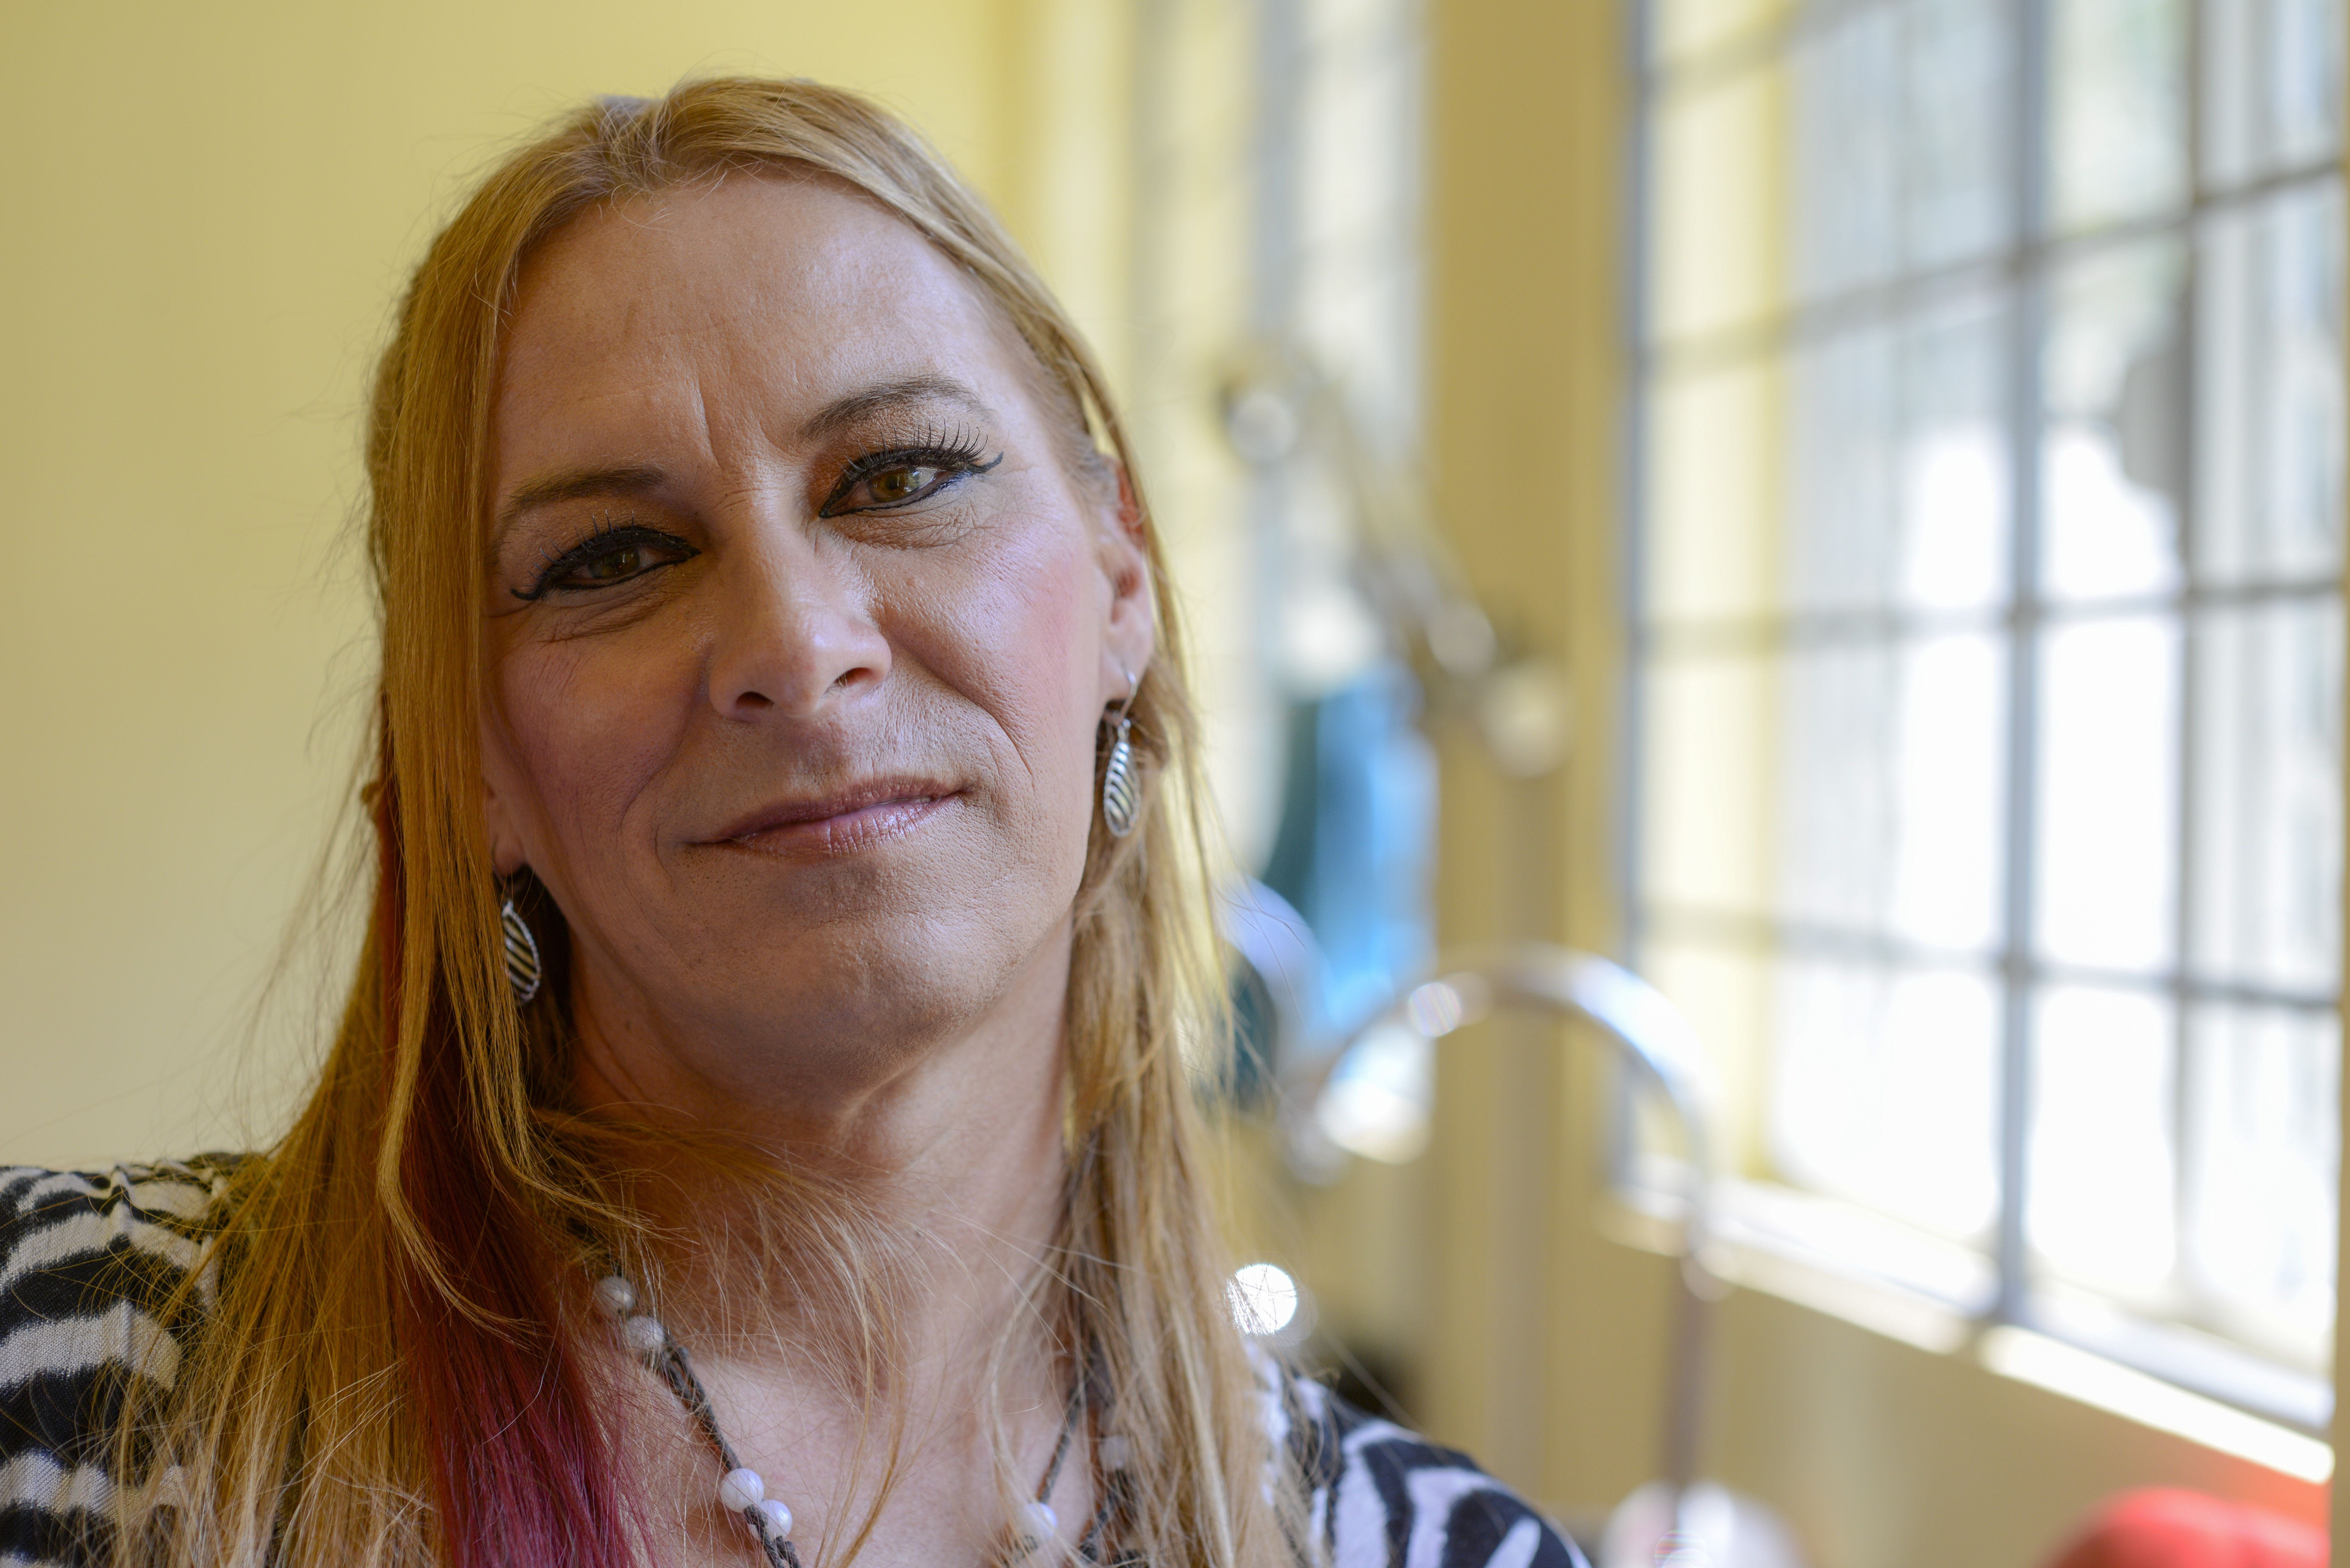 43-year-old Dulcie is transgender and fled Guatemala after being persecuted by police and gangs. She has found safety and shelter with the support of UNHCR.